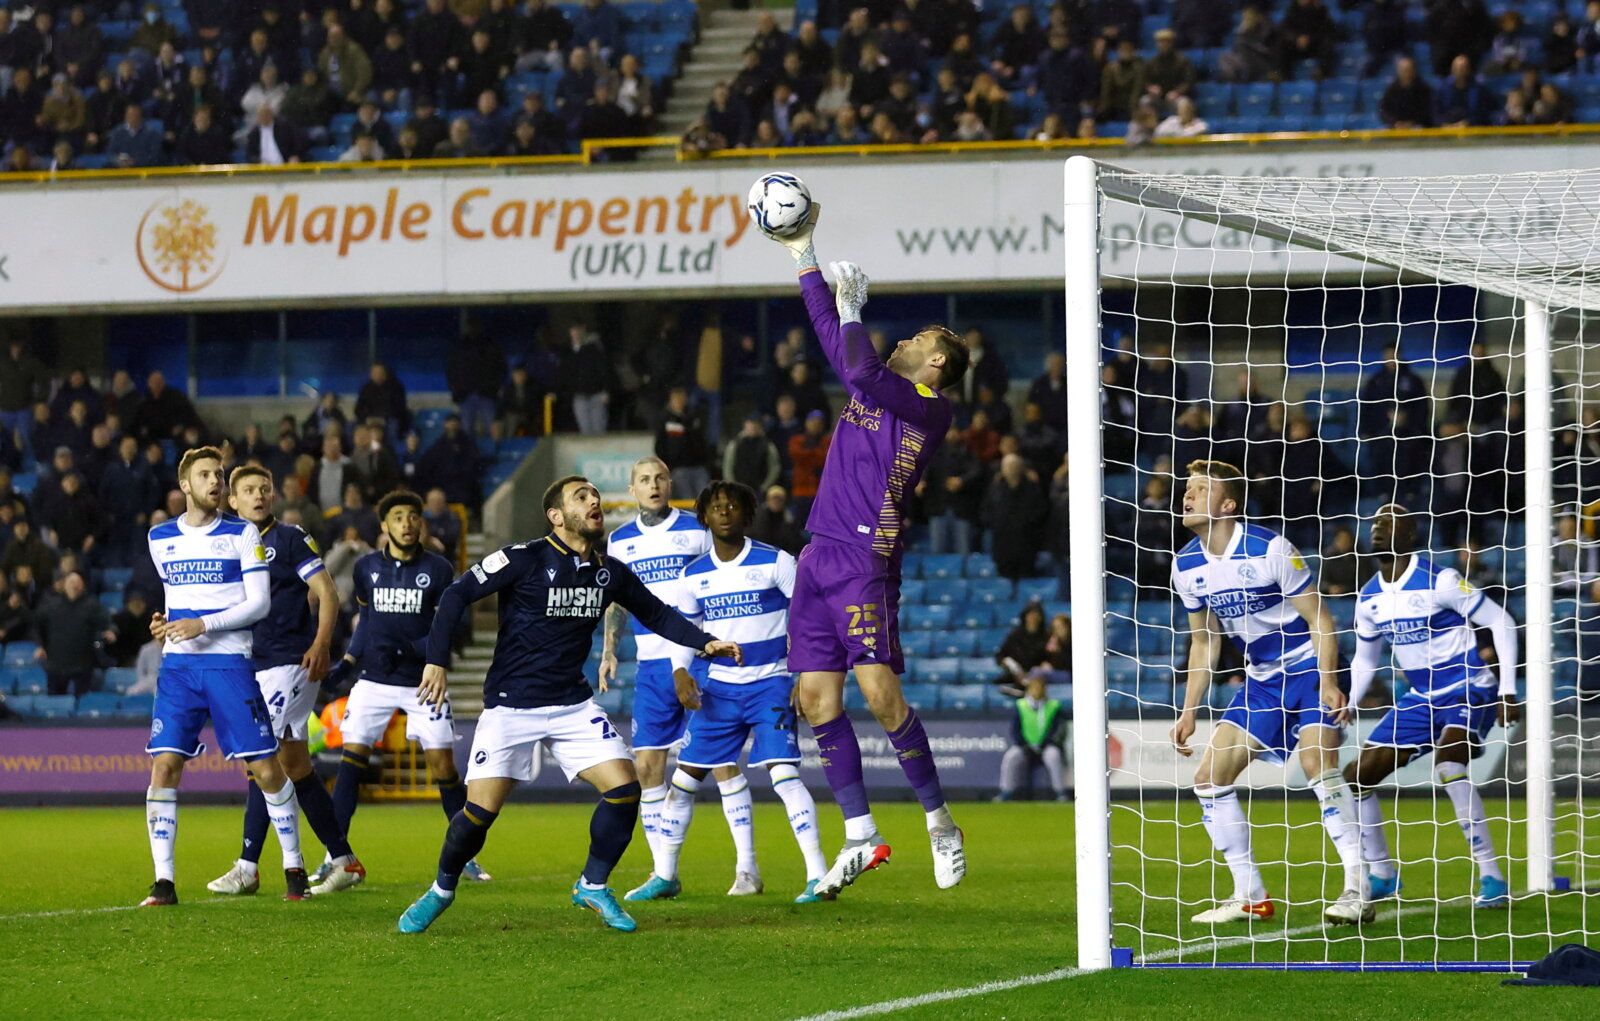 Soccer Football - Championship - Millwall v Queens Park Rangers - The Den, London, Britain - February 15, 2022 Queens Park Rangers' David Marshall saves a shot from Millwall's Jake Cooper Action Images/Andrew Boyers  EDITORIAL USE ONLY. No use with unauthorized audio, video, data, fixture lists, club/league logos or 